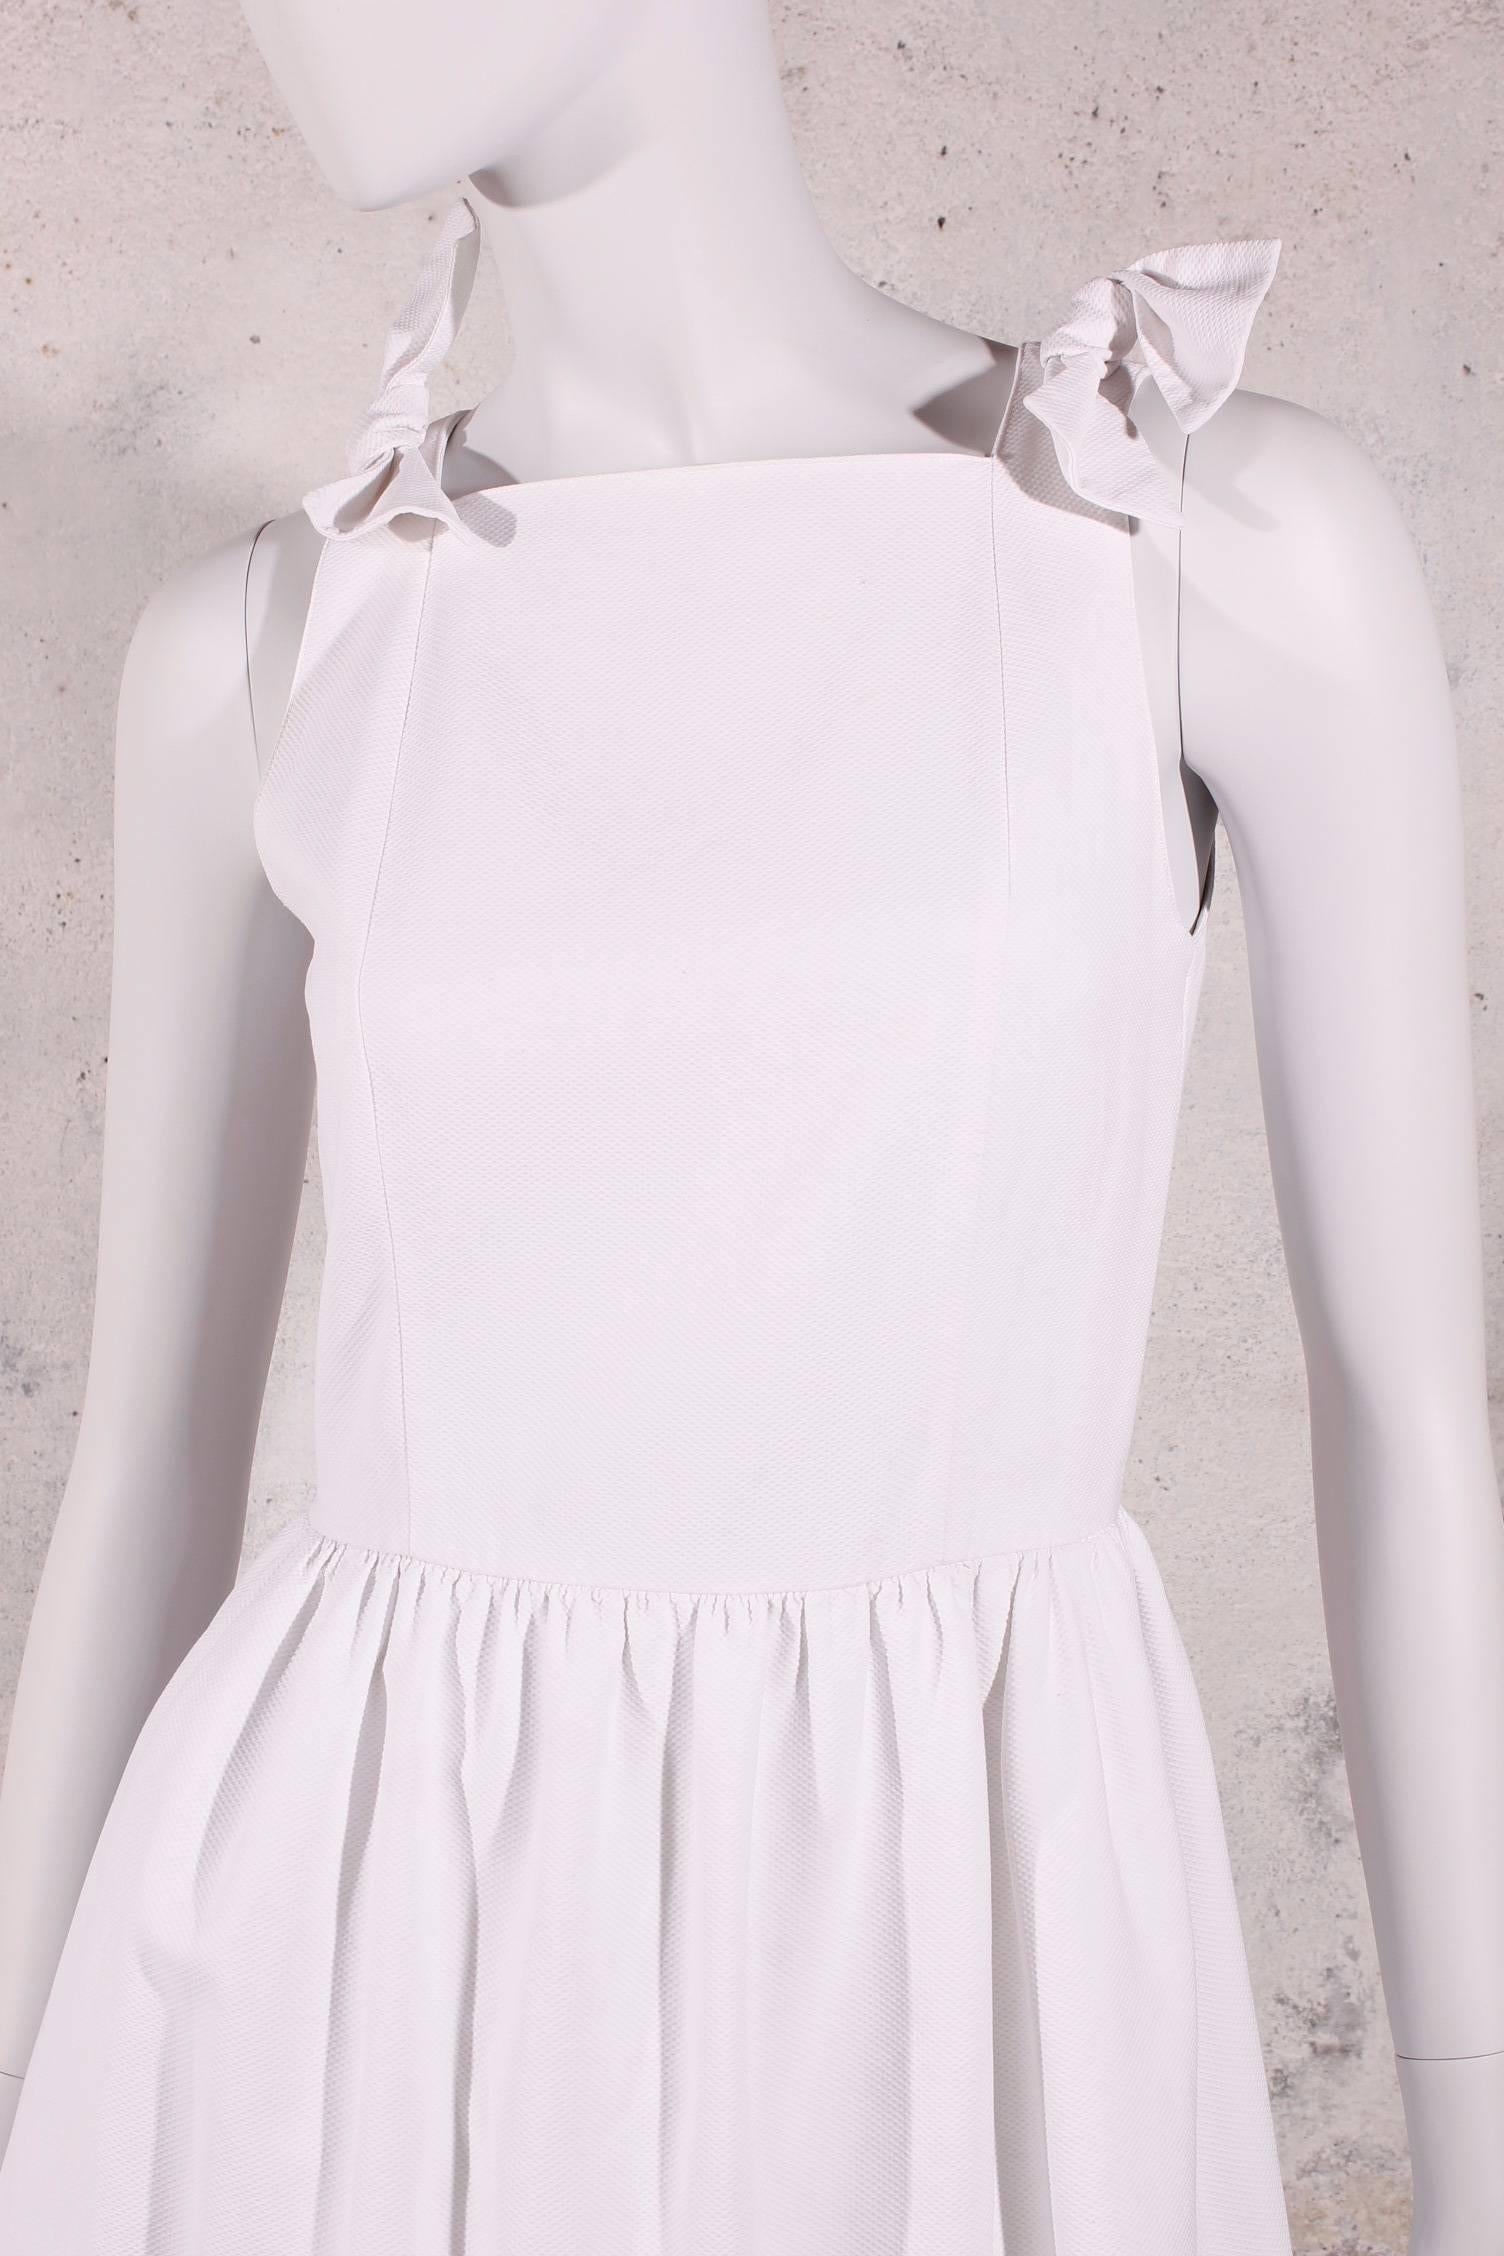 1980s Chanel Dress White In Good Condition For Sale In Baarn, NL